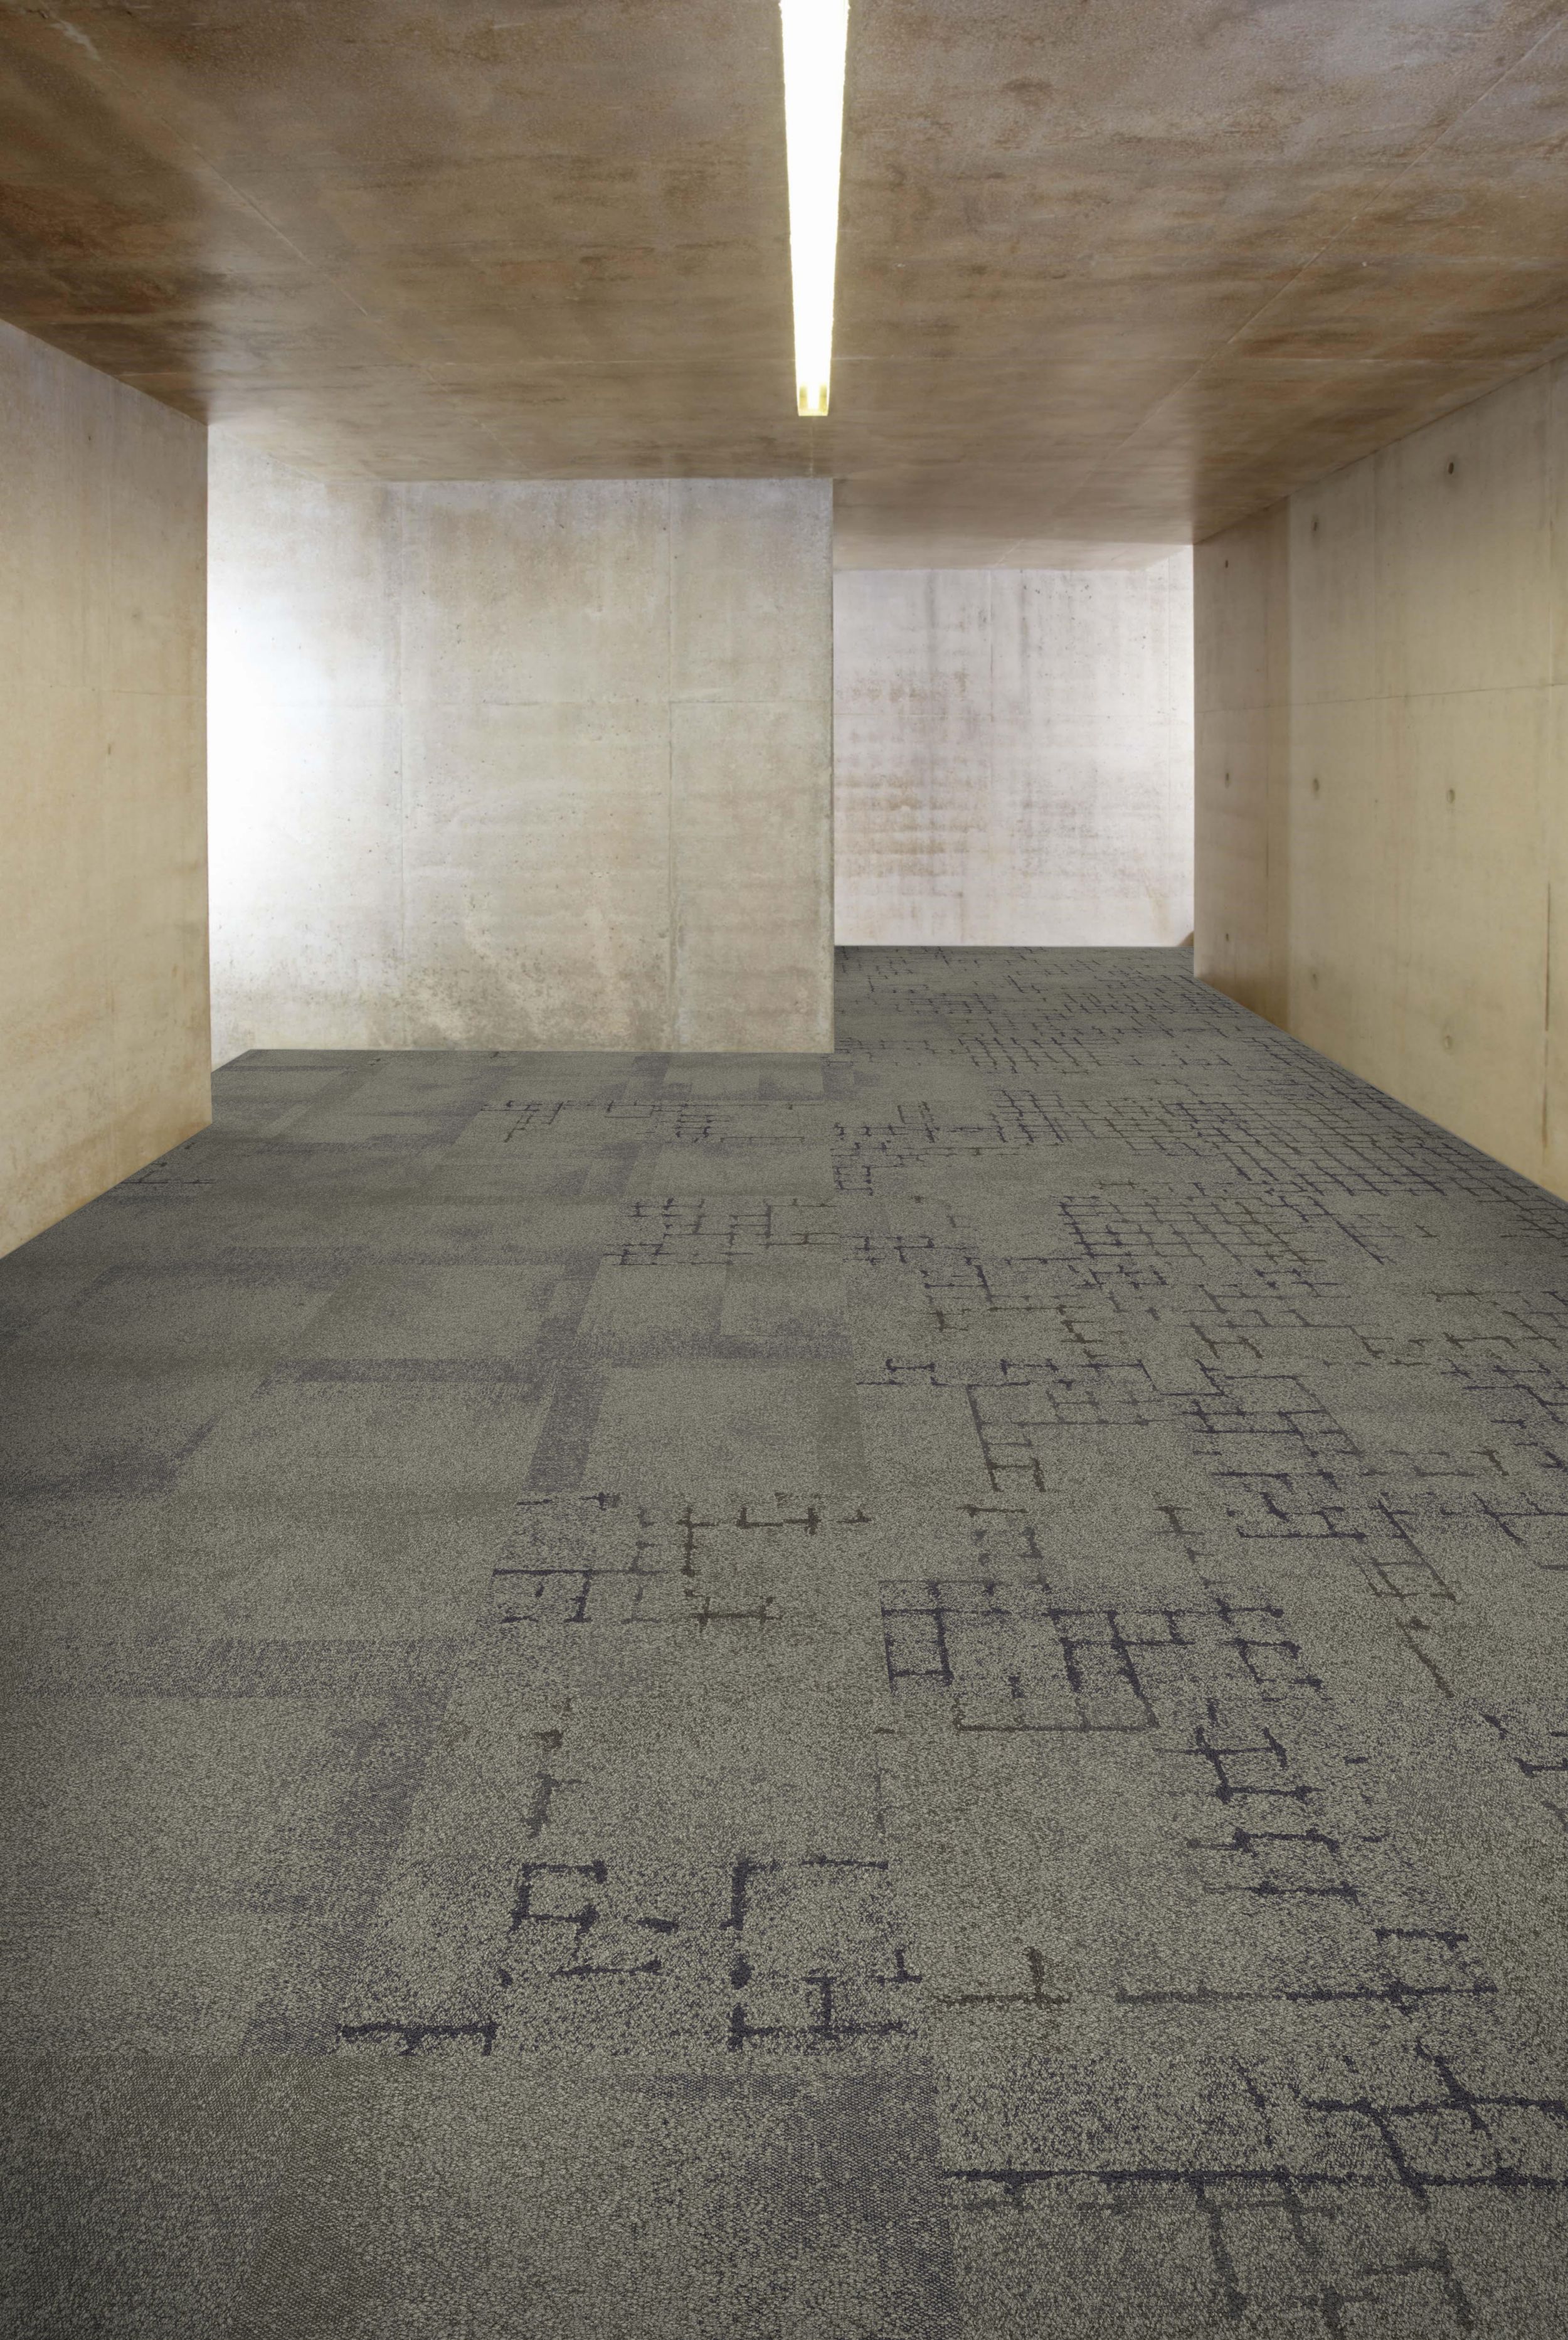 Interface Flagstone, Kerbstone and Sett in Stone carpet tile in corridor with concrete walls and ceiling número de imagen 5